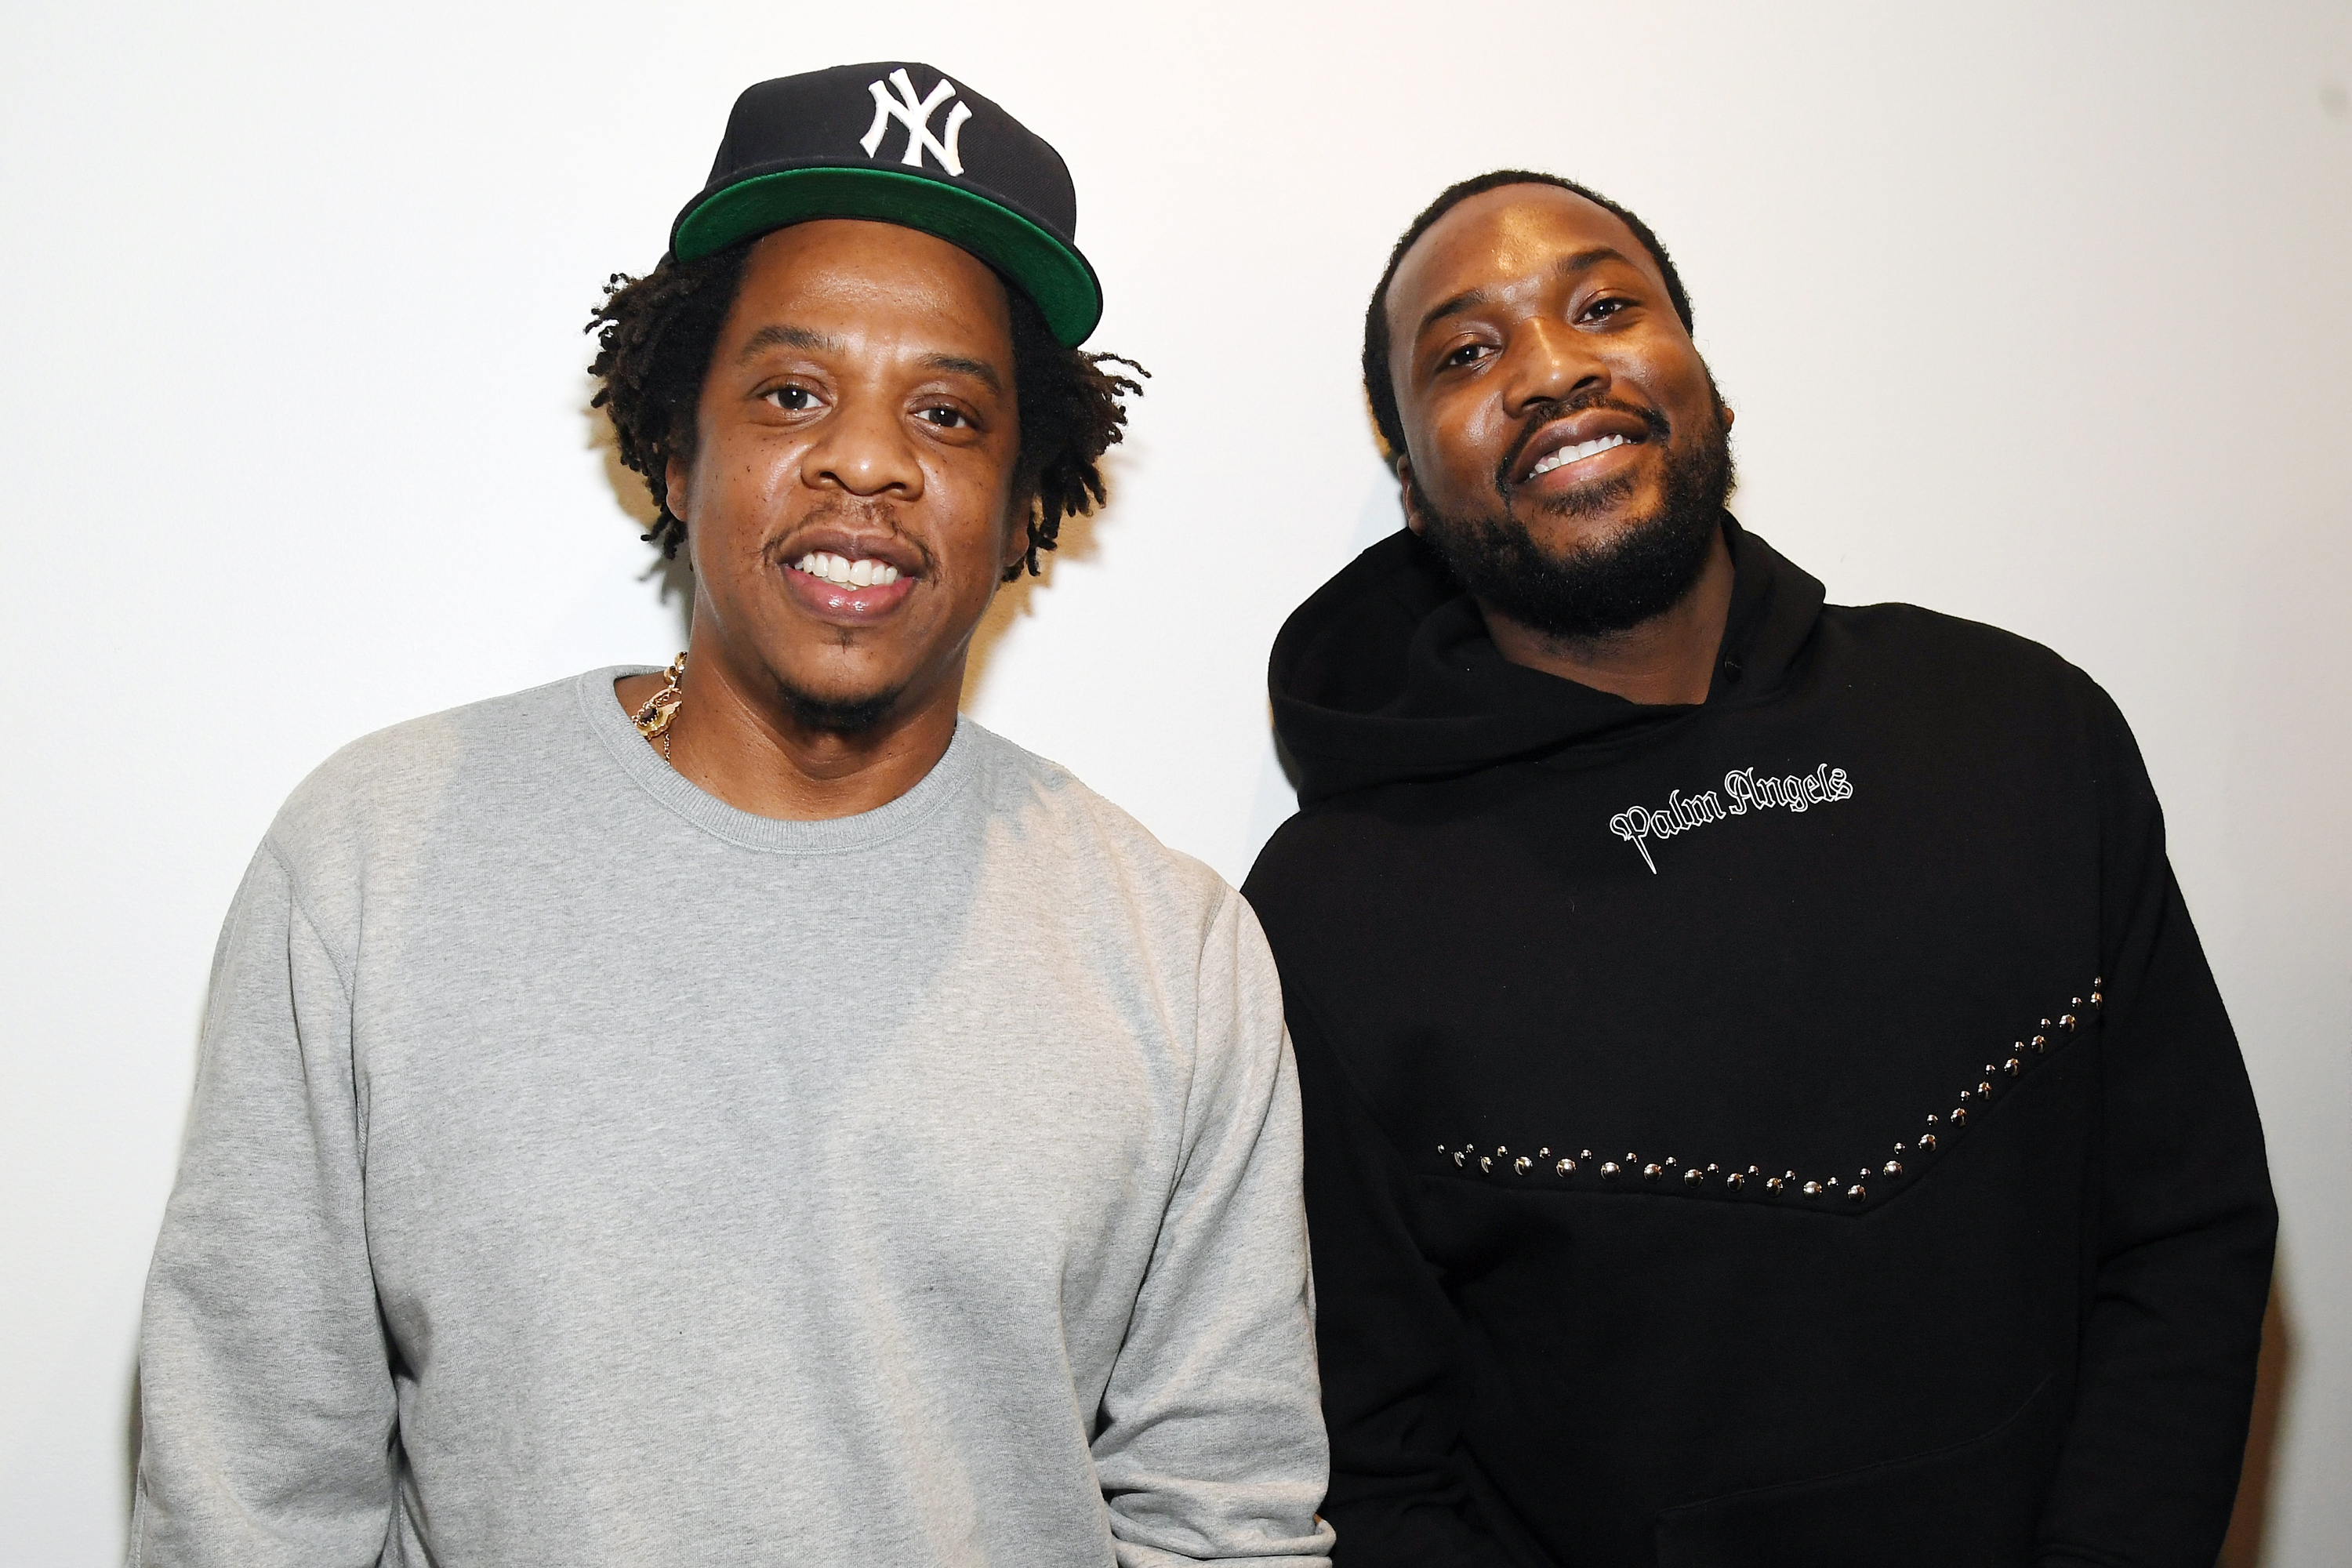 Jay Z And Meek Mill Sending 10 Million Surgical Masks To U.S. Jails And Prisons